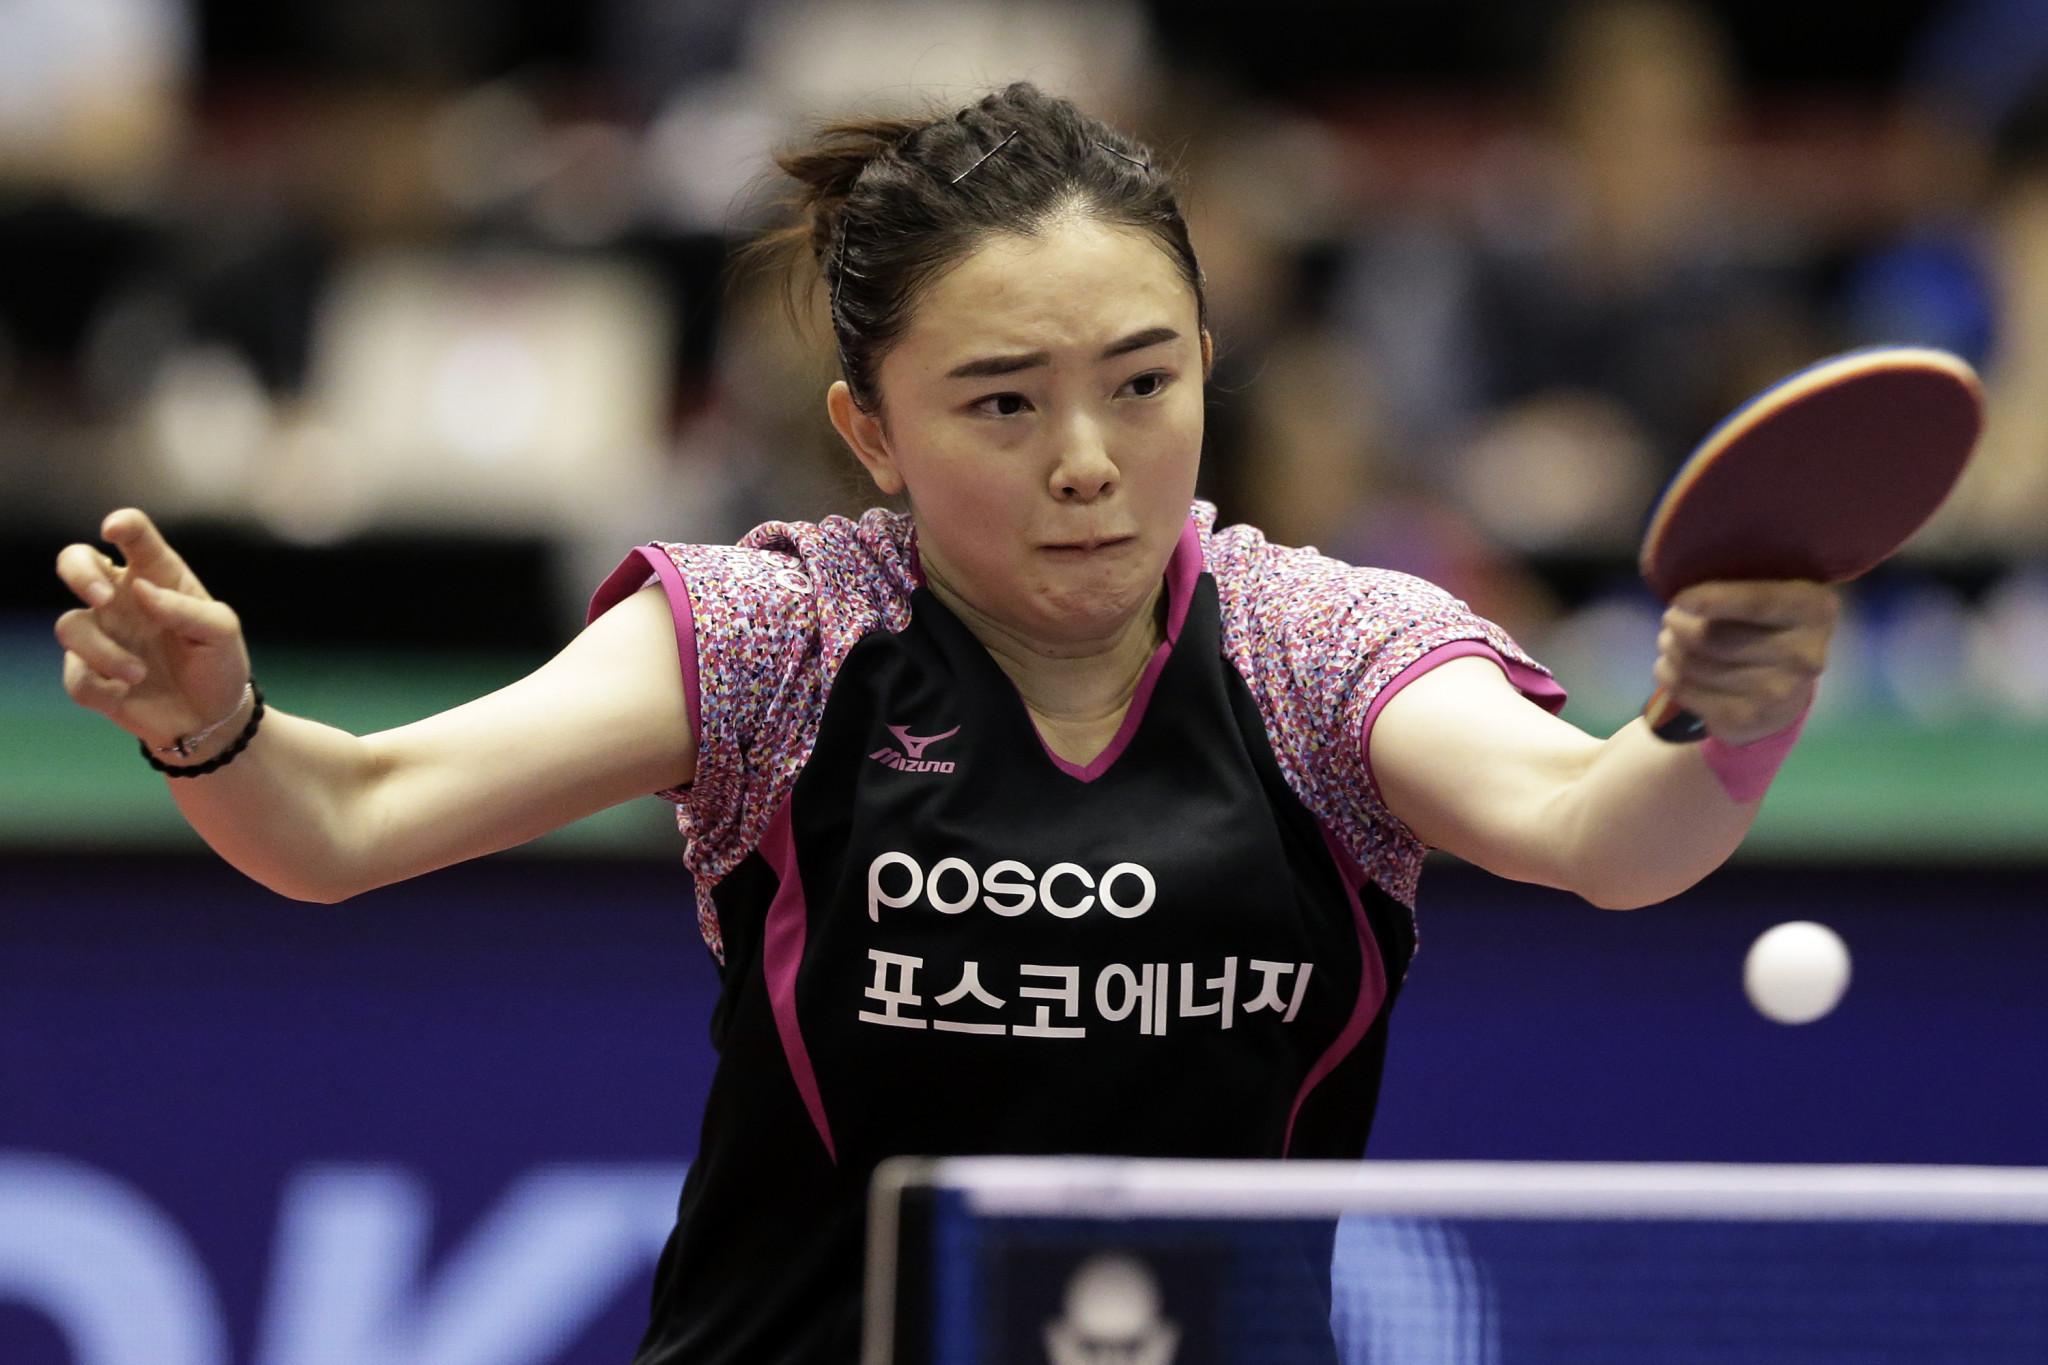 Jeon Ji-hee, pictured, and Shin Yubin won the women's doubles gold ©Getty Images